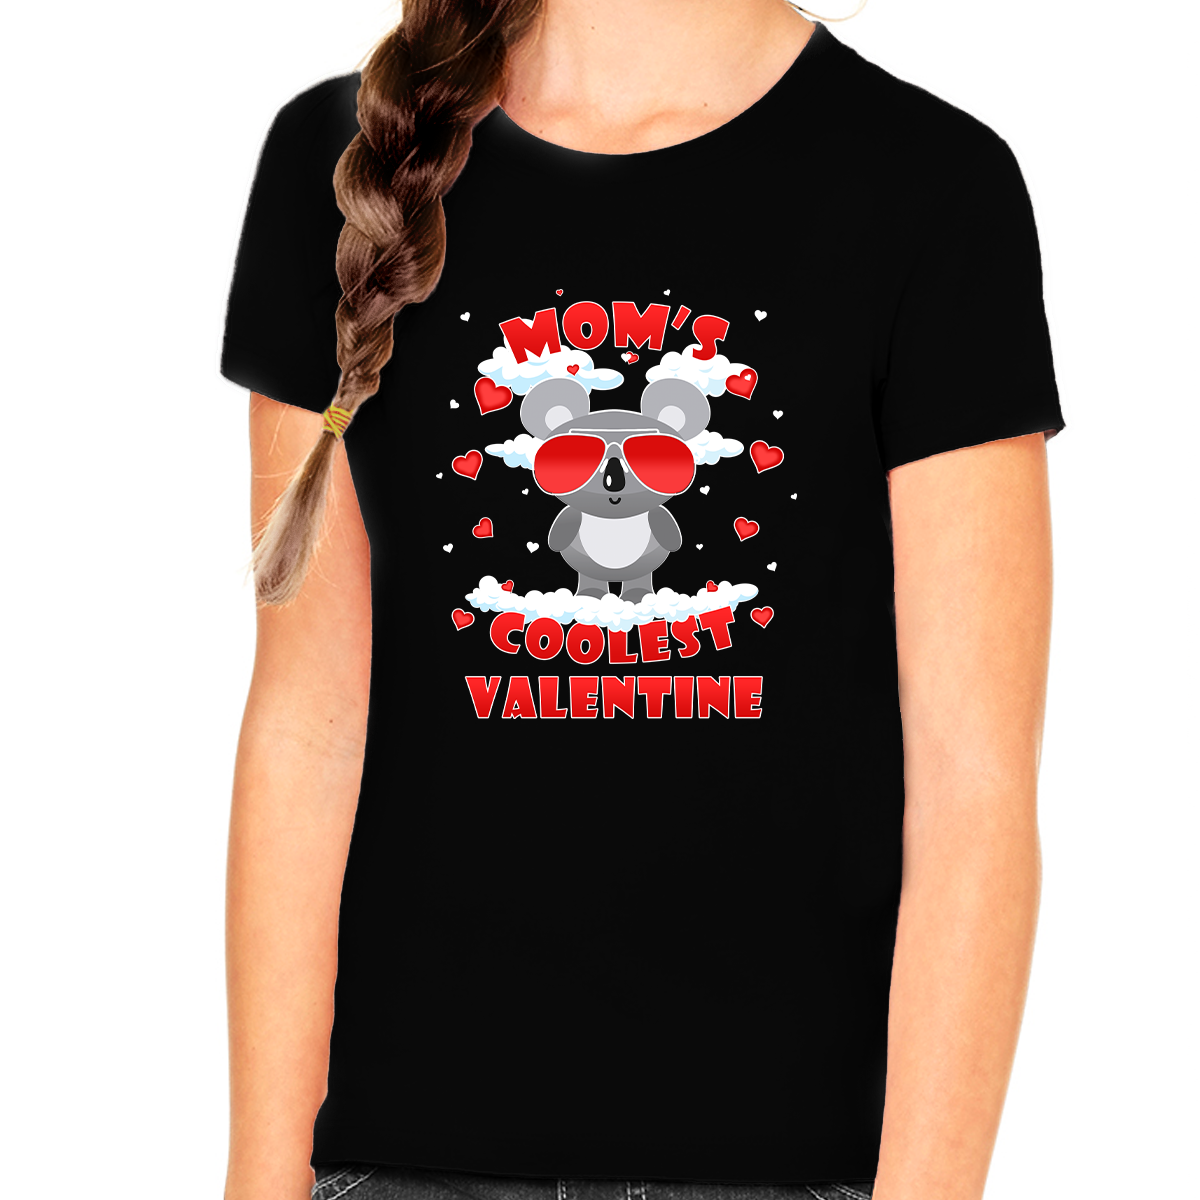 Girls Valentines Day Shirt Funny Mom's Coolest Valentine Shirt for Girls Valentines Day Gifts for Kids